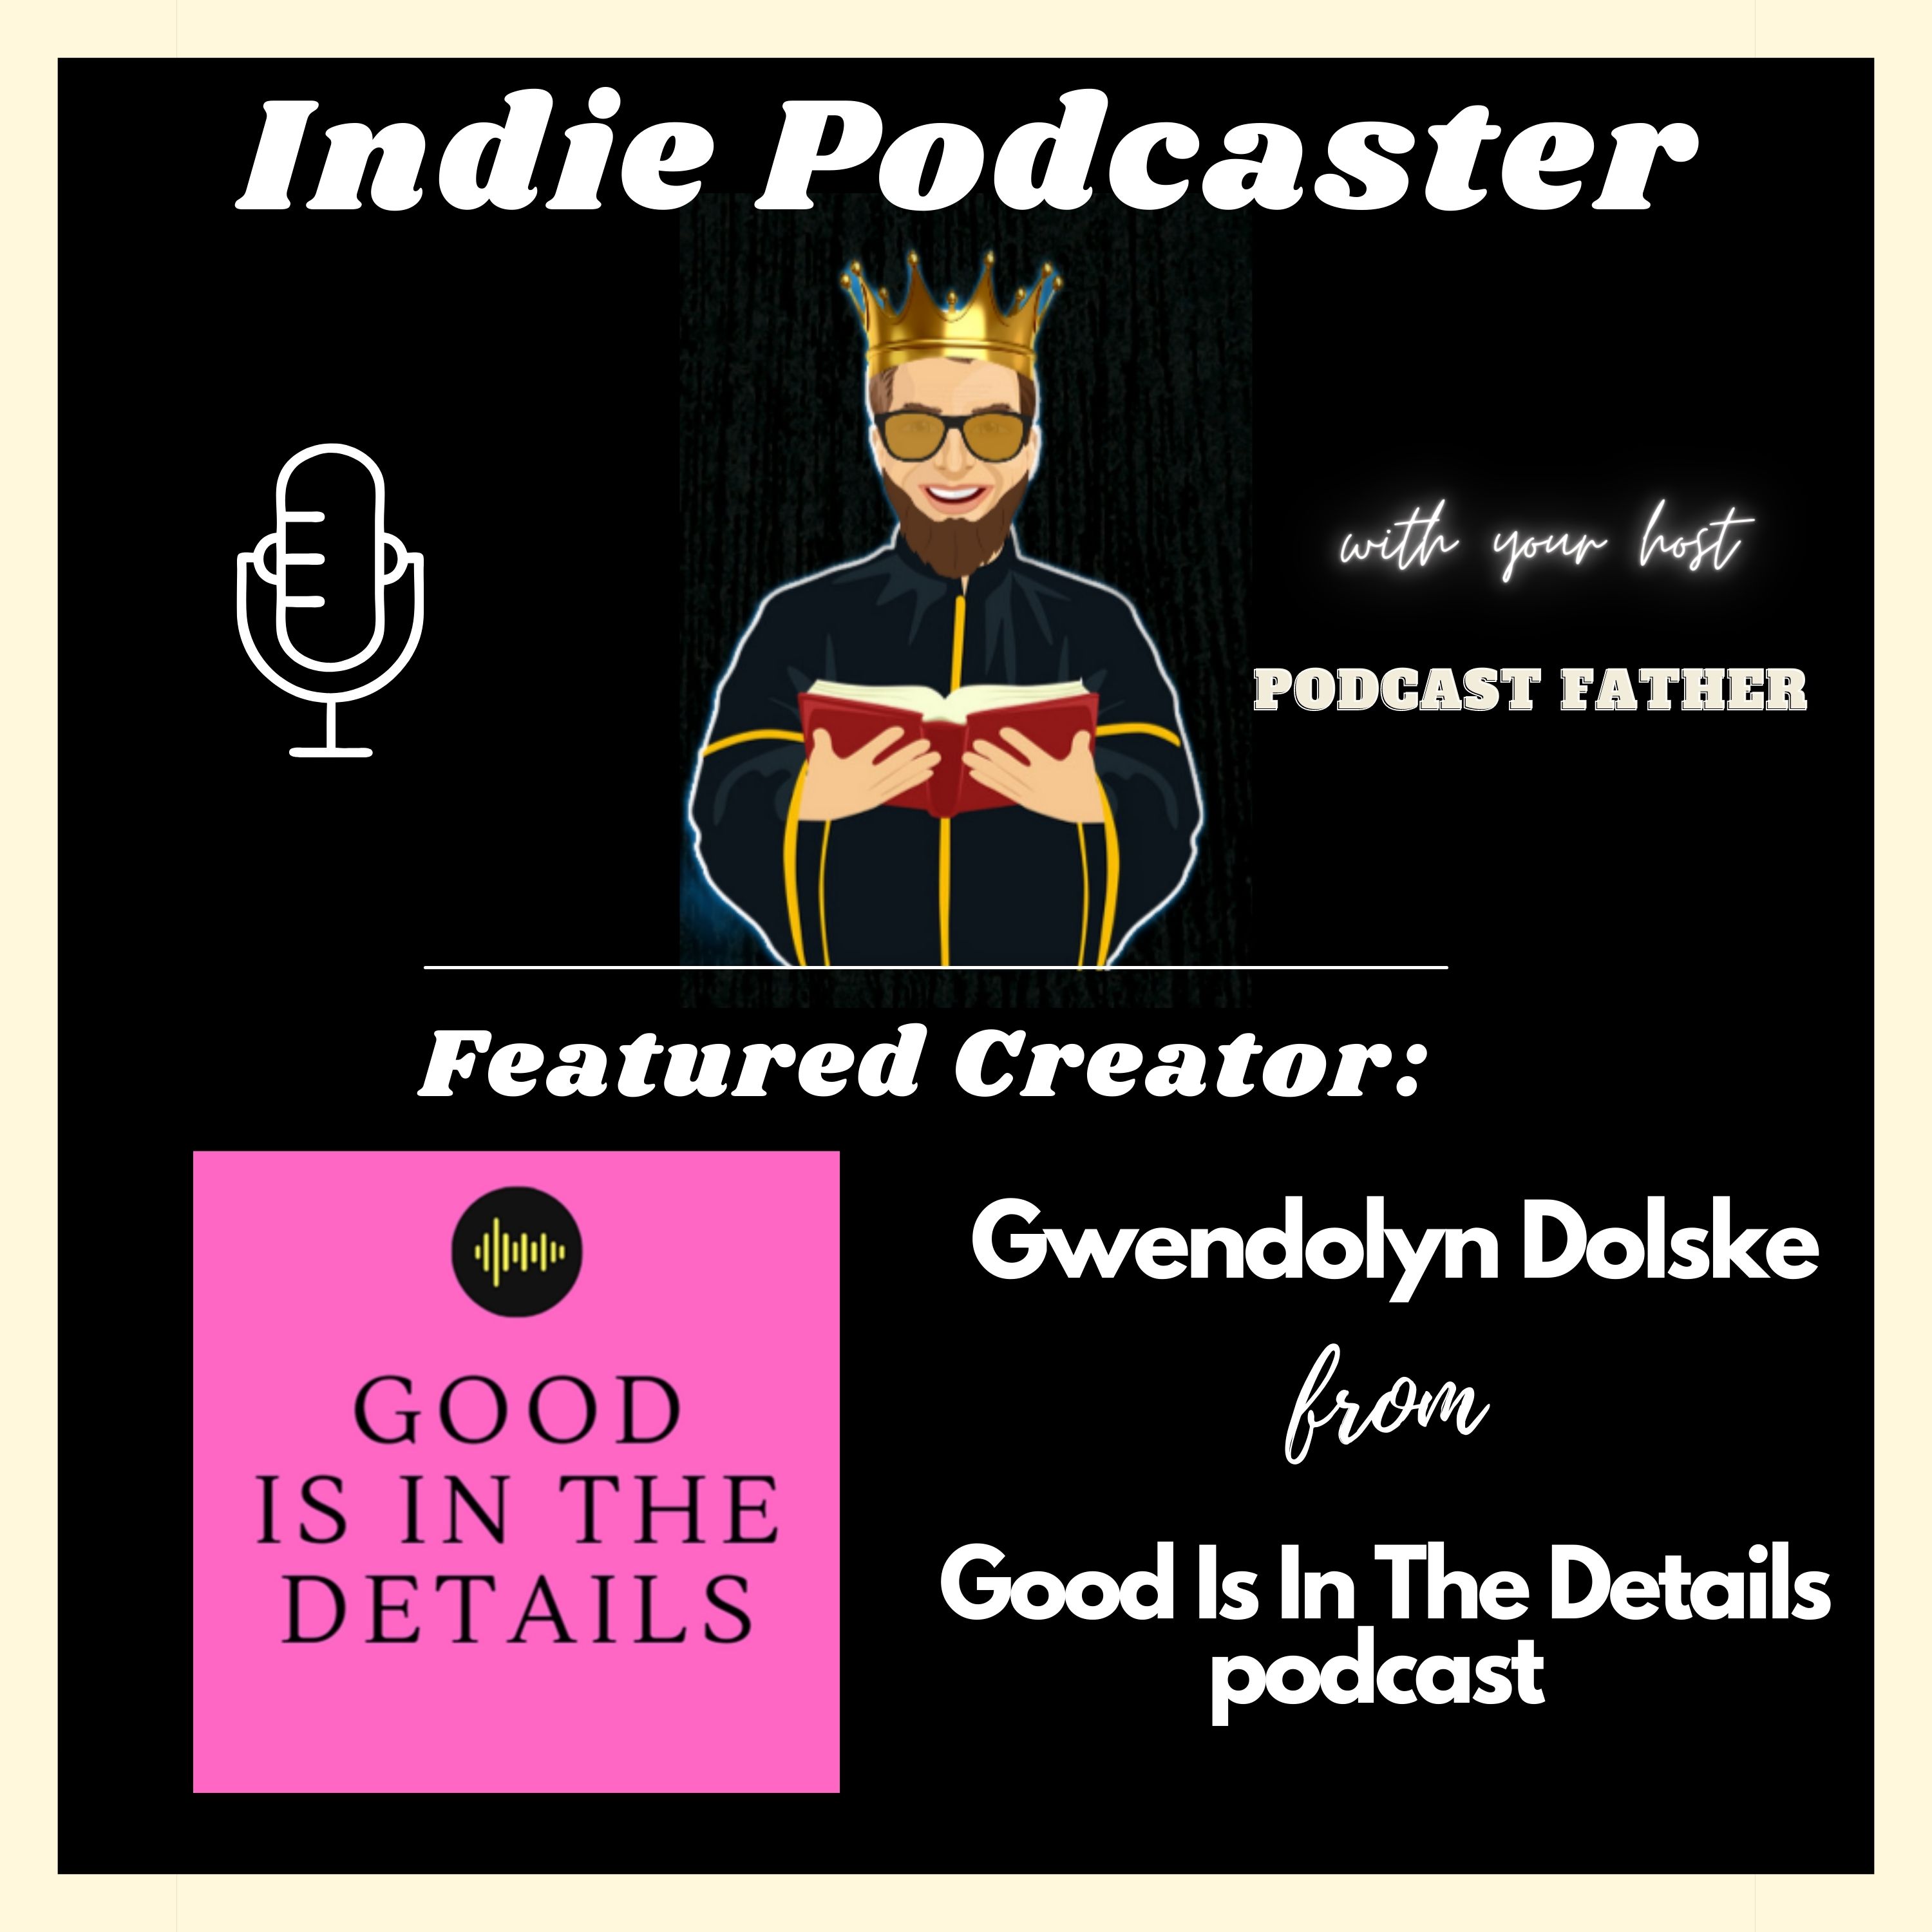 Gwendolyn Dolske from Good Is In The Details Image